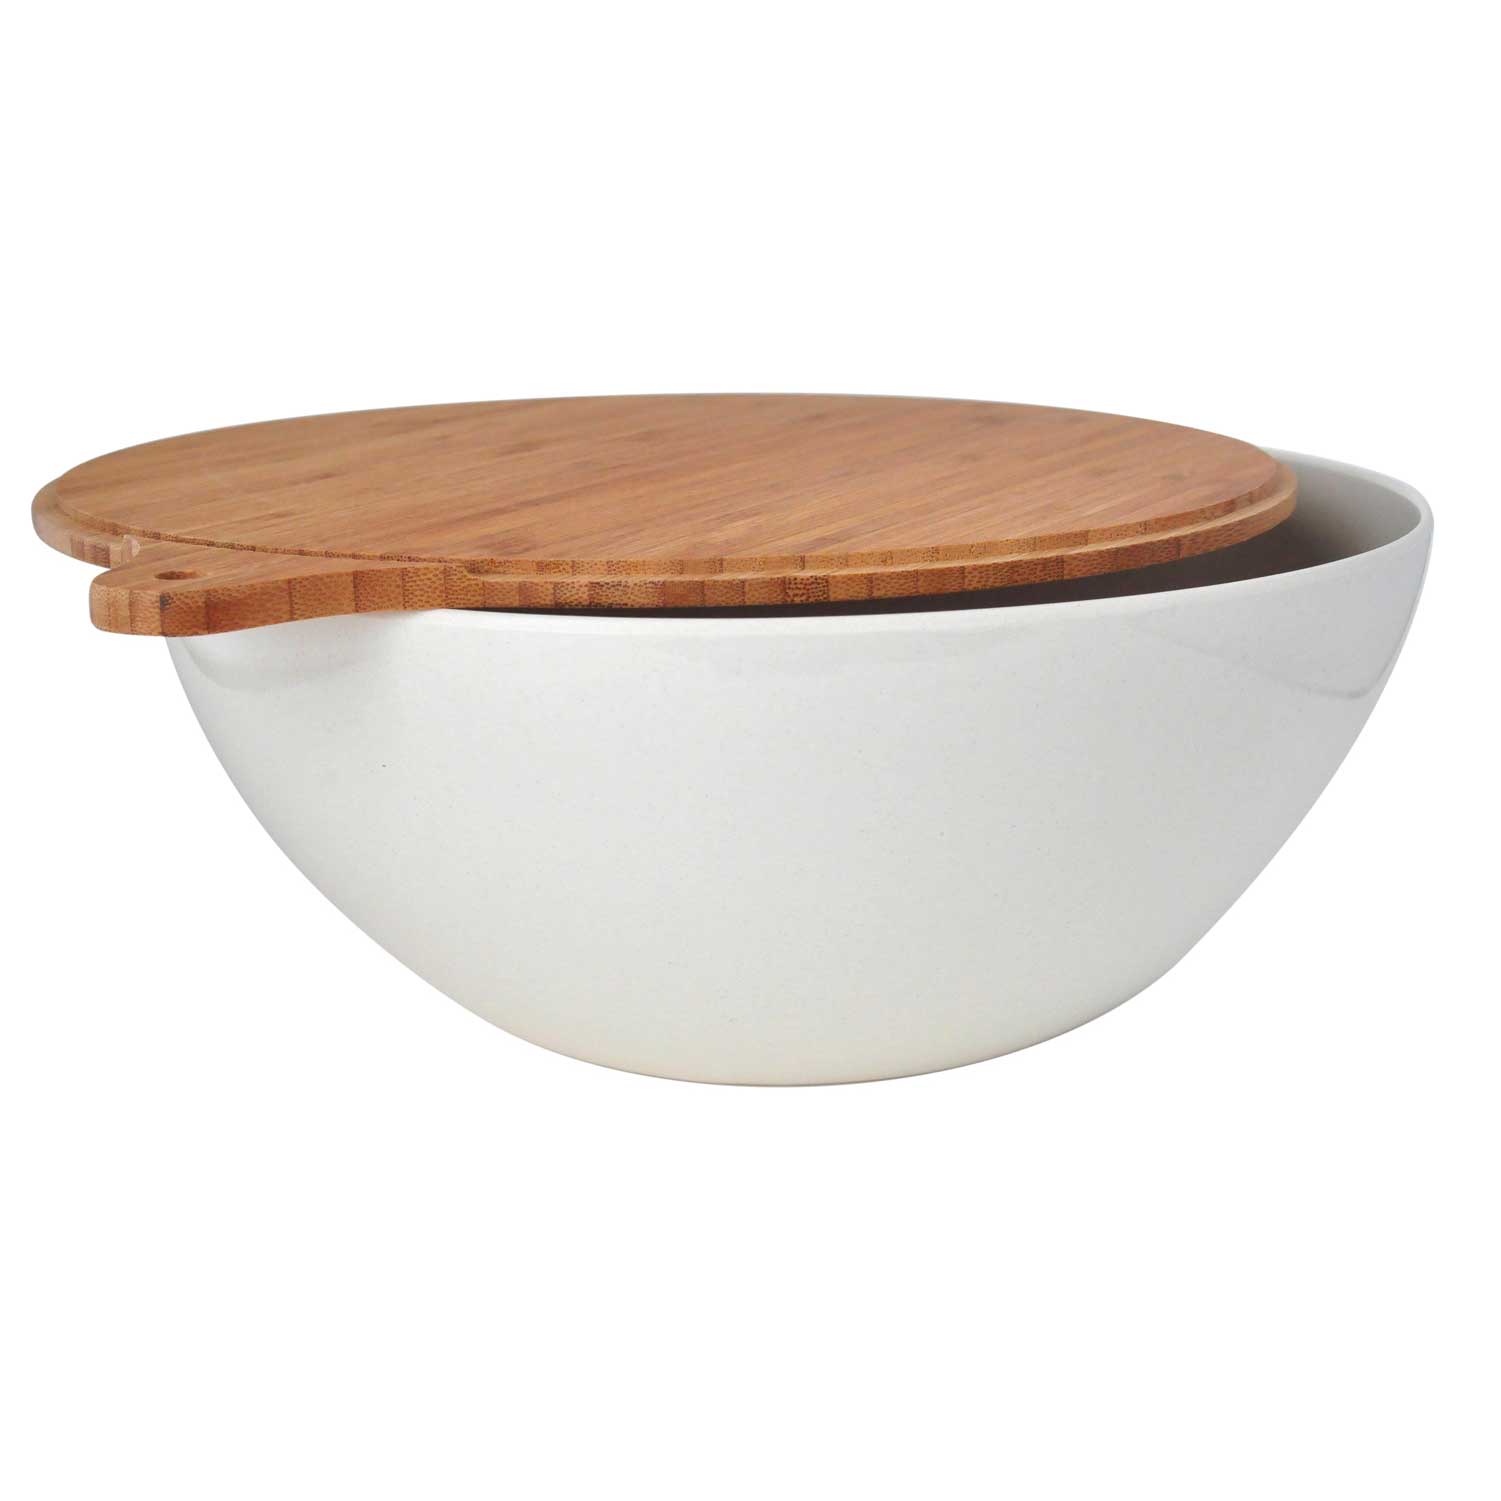 MasterTop White Bamboo Fiber Salad Bowl with Lid, Size: Plastic Bowl: 27*12, 18.5*9, Weight 328g, 170g Drain Basket: 27*11.5, Weight 165g, Partition